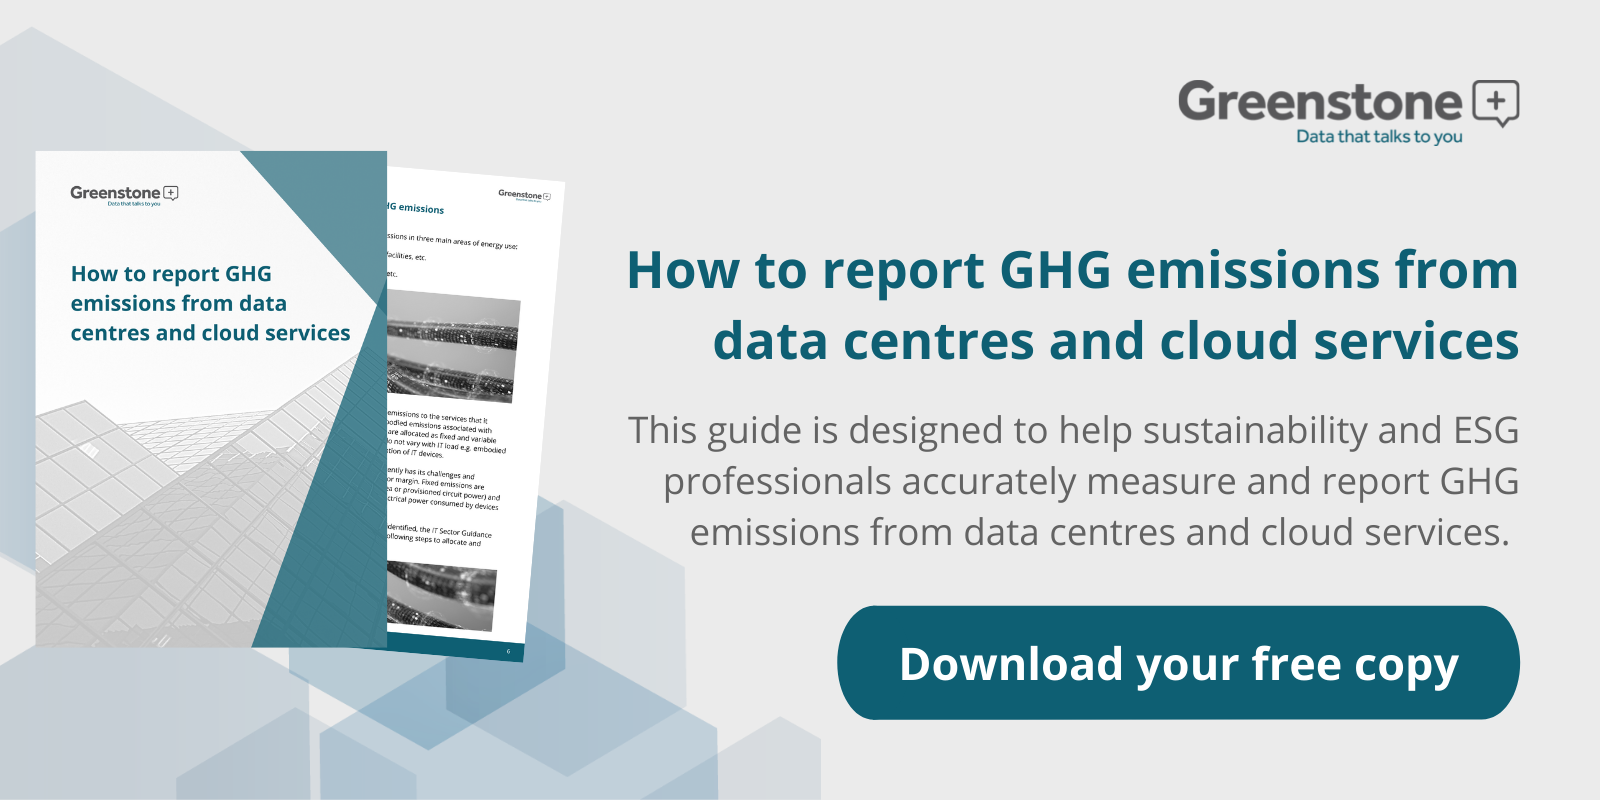 How to report GHG emissions from data centres and cloud services